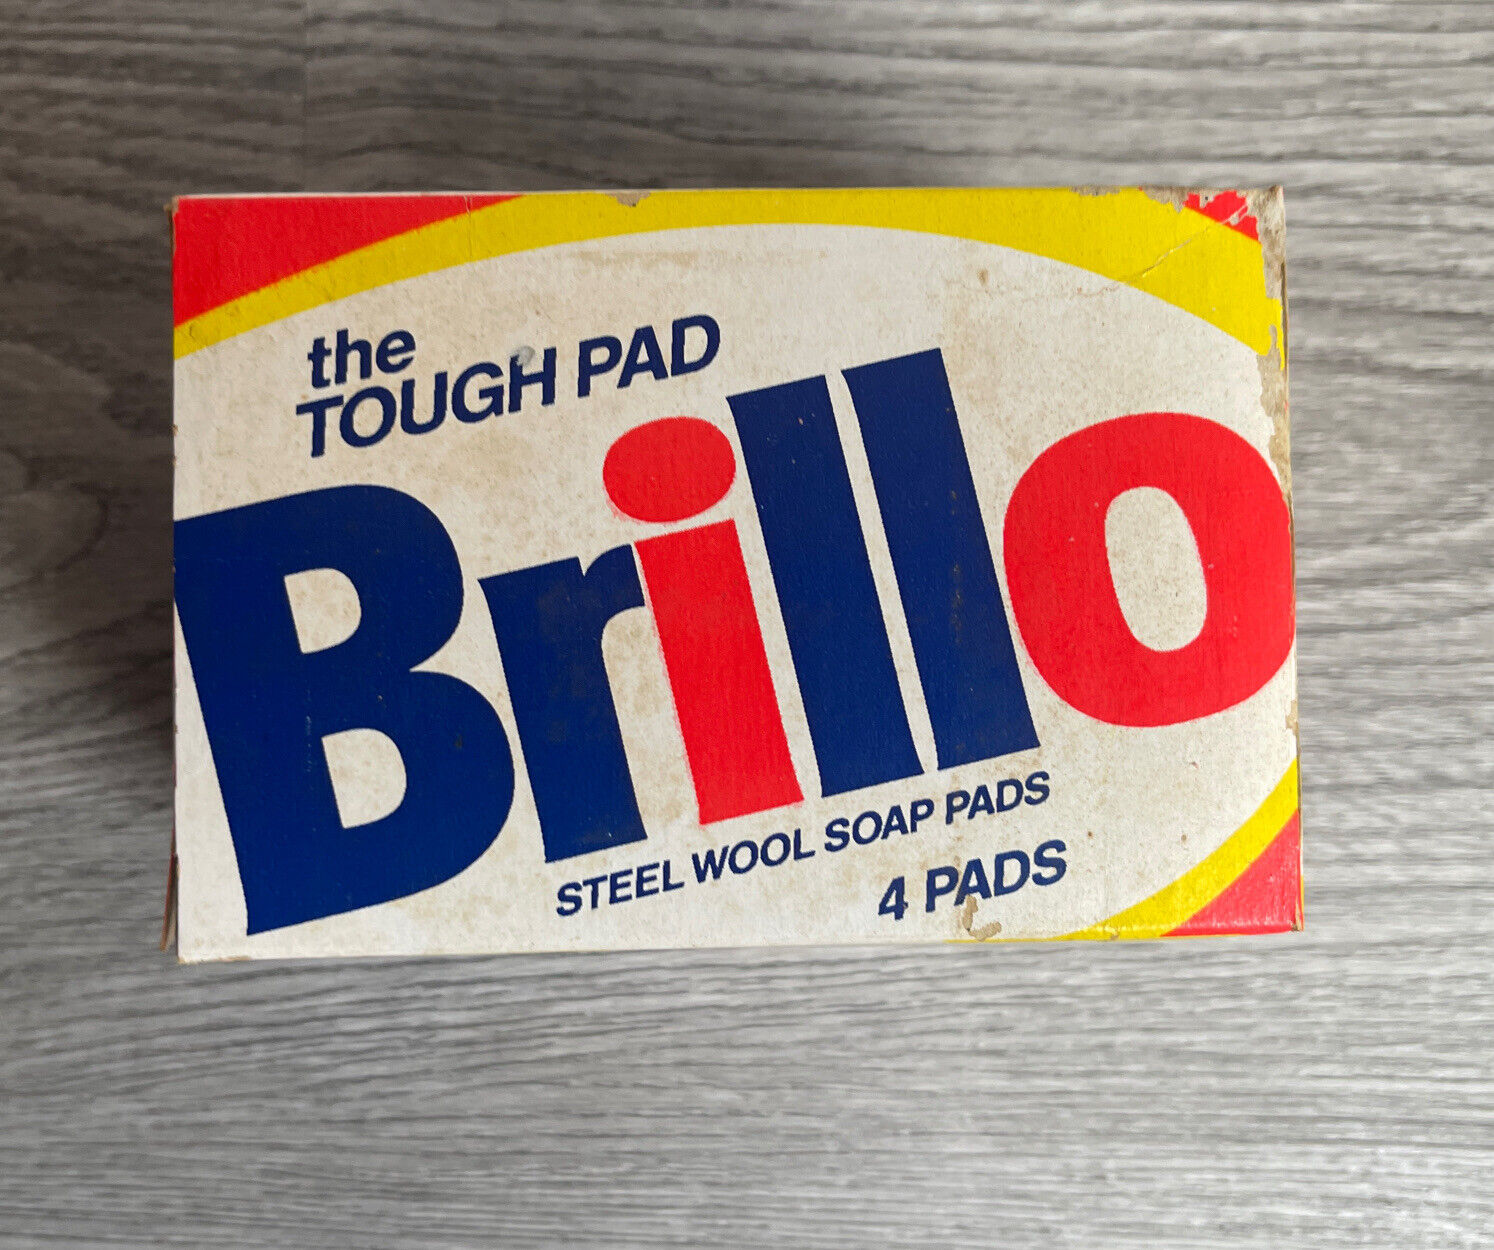 Vintage 90s Box of 3 Brillo Steel Wool Soap Pads Dial Corporation